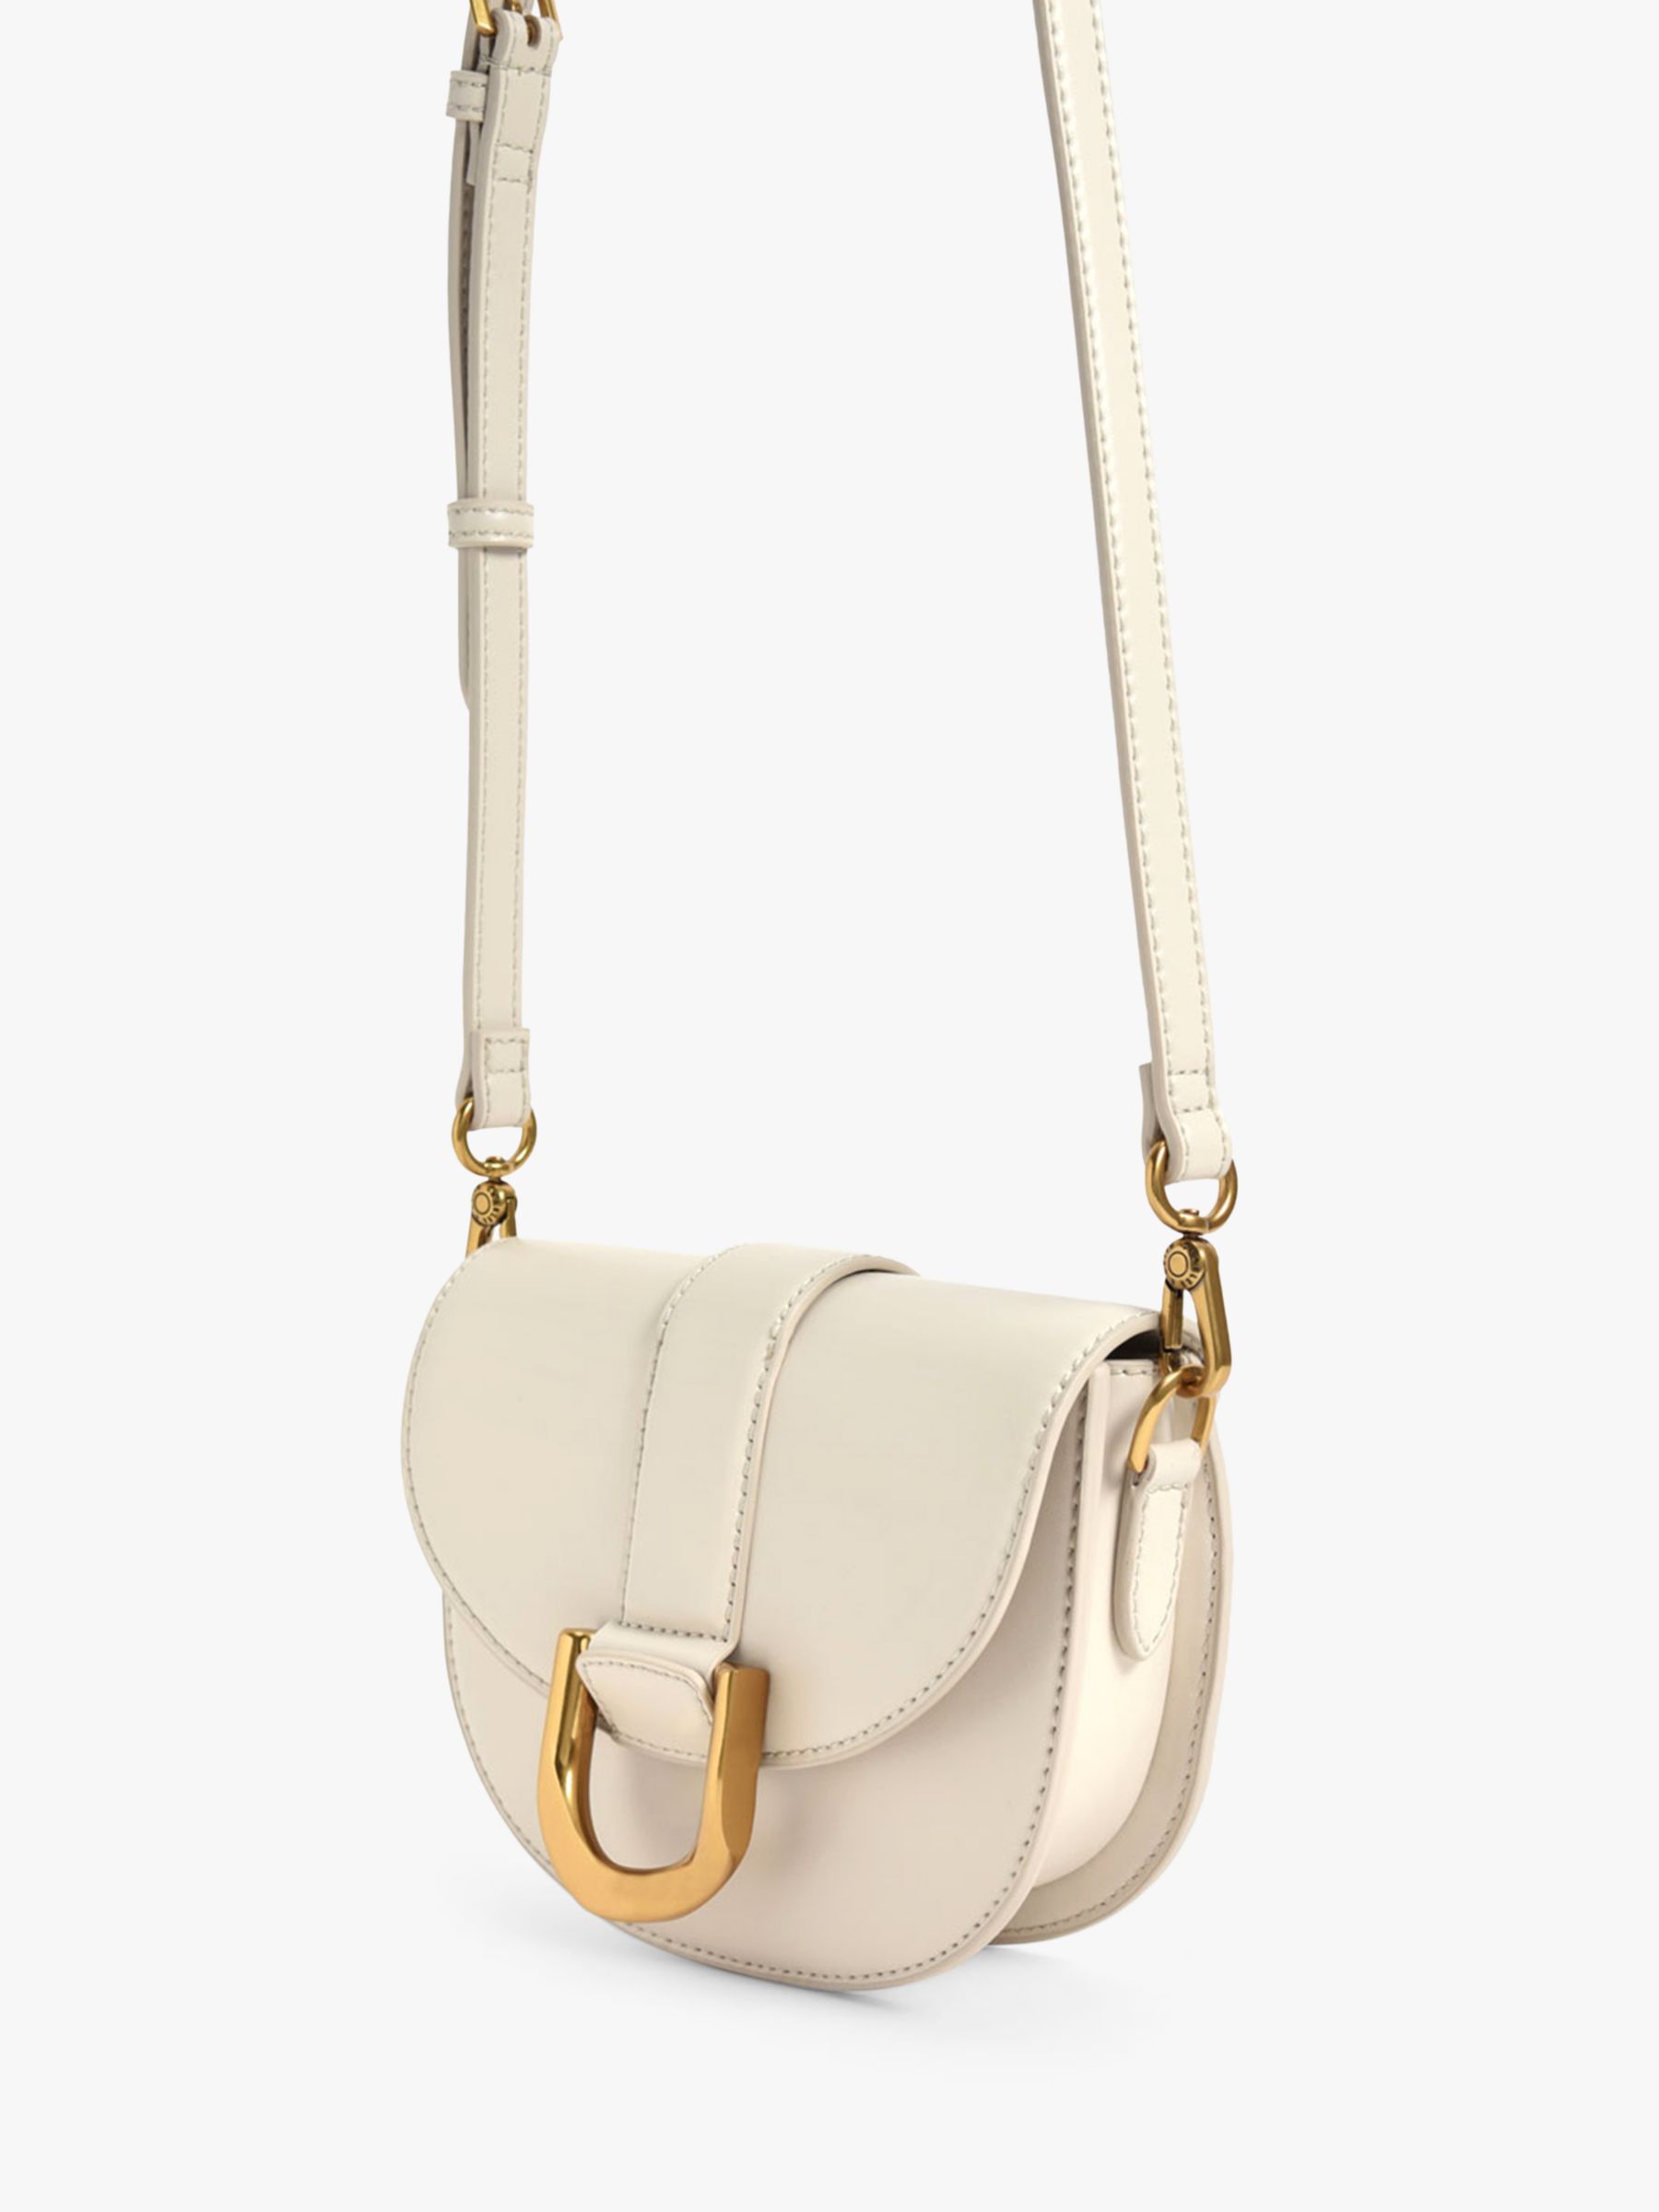 CHARLES & KEITH Gabine Faux Leather Shoulder Bag, White